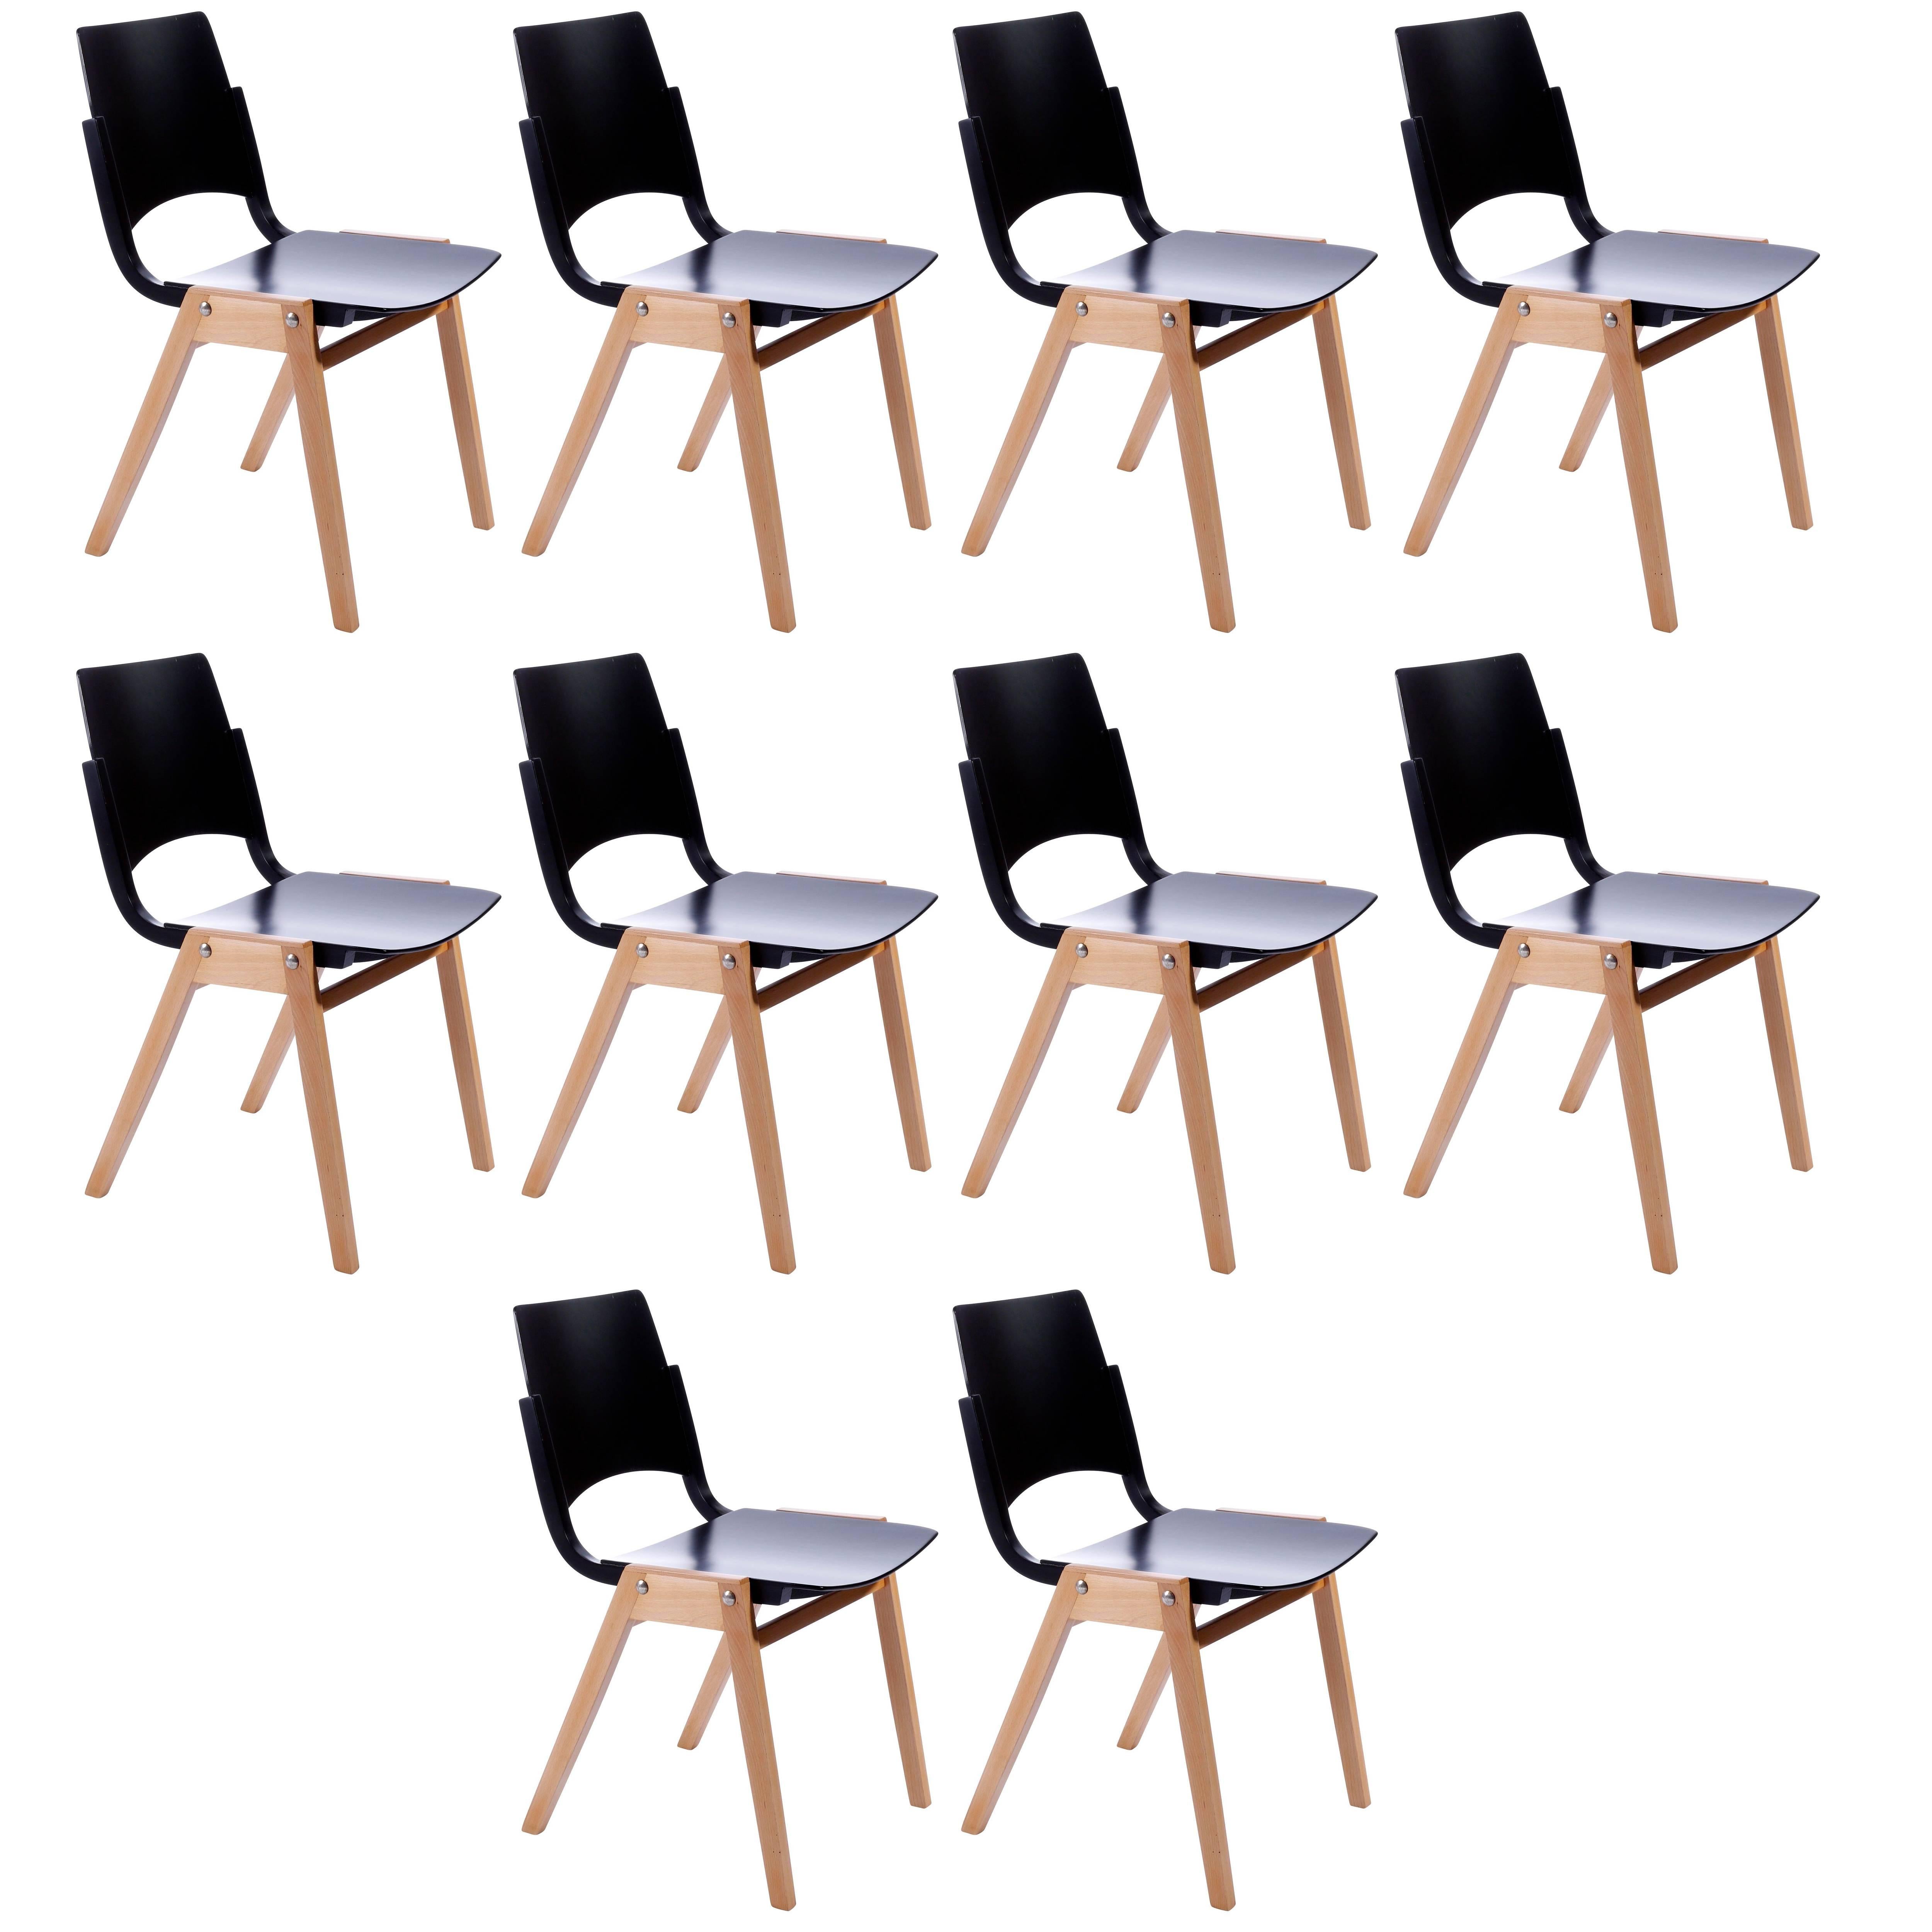 One of Ten Roland Rainer Stacking Chairs P7, Bicolored Beech Black Austria, 1952